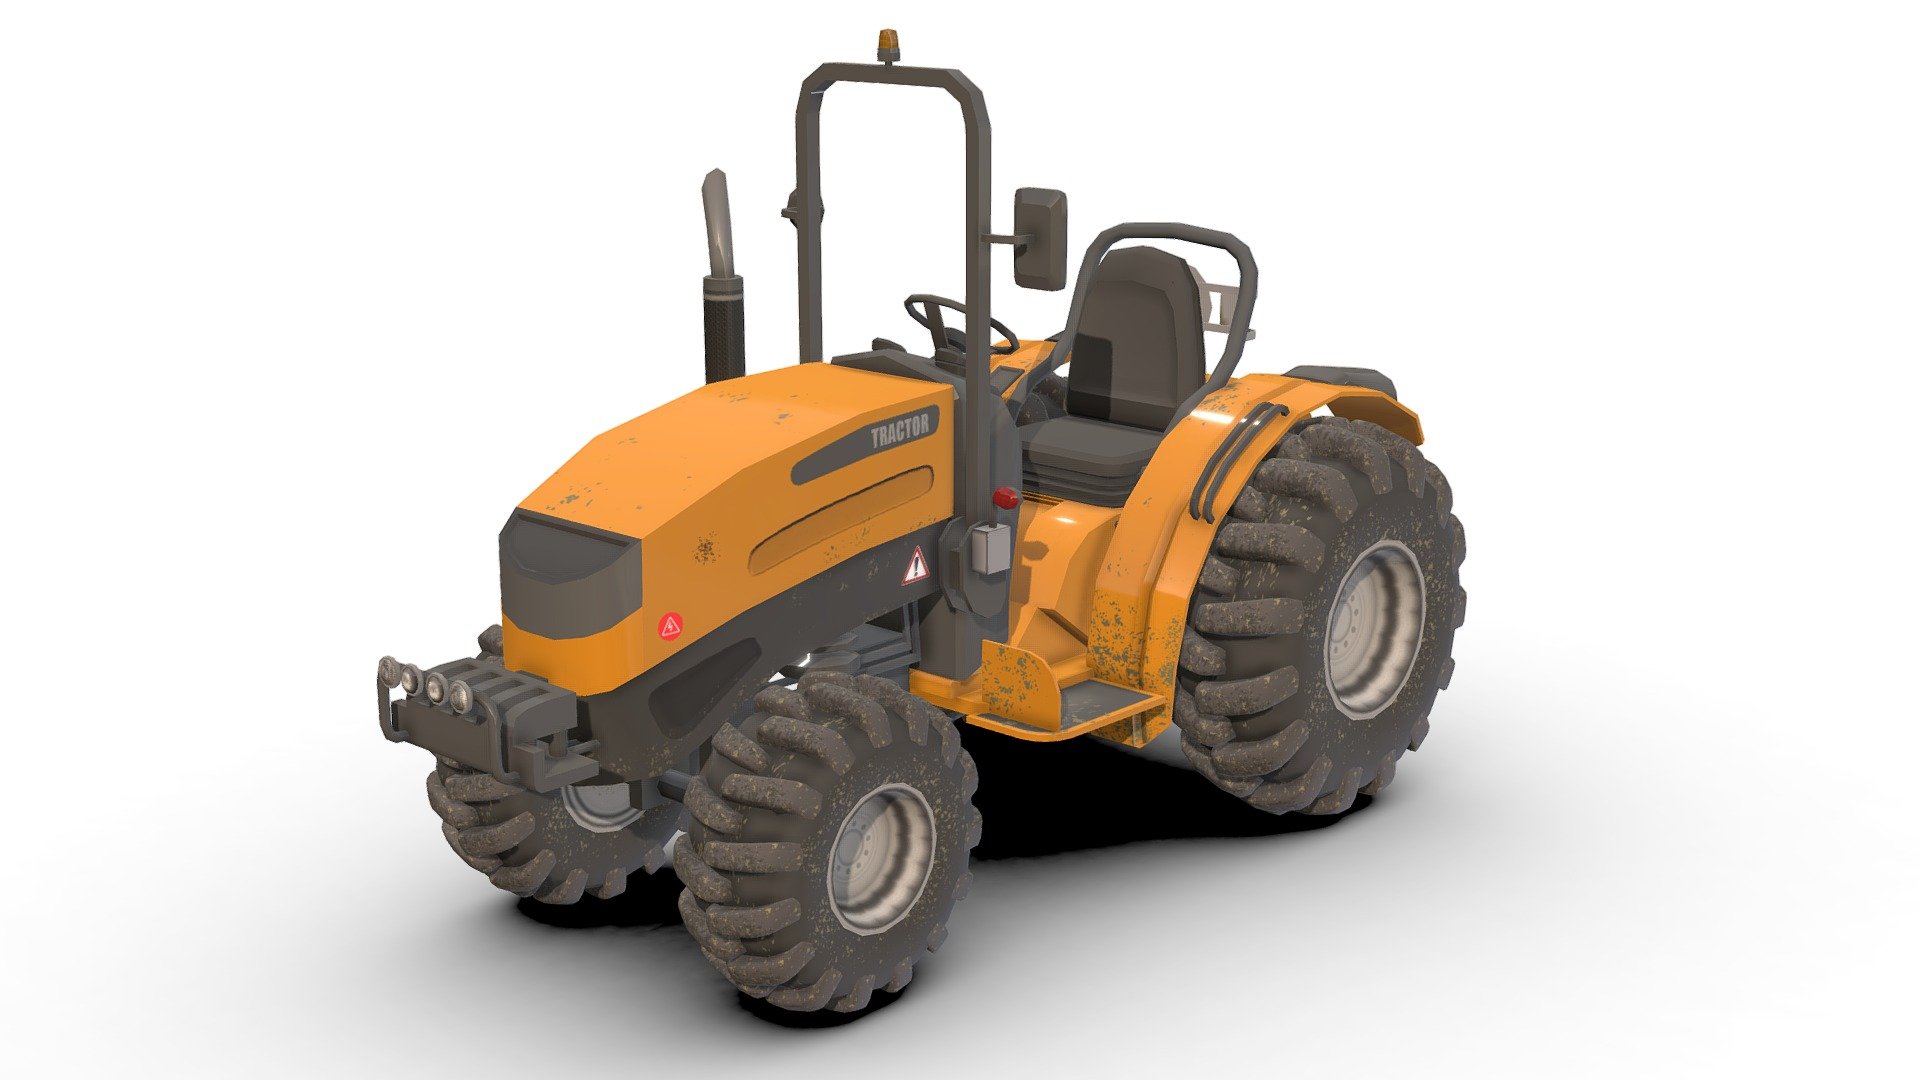 Tractor Model .

You can use these models in any game and project.

This model is made with order and precision.

Separated parts (bodys. wheels.Steer).

Very Low- Poly.

Truck have separate parts.

Average poly count: 20,000 tris.

Texture size: 2048 / 1024 (PNG).

Number of textures: 2.

Number of materials: 2.

Format: Fbx / Obj / 3DMax .

Wait for my new models.. Your friend (Sidra) 3d model